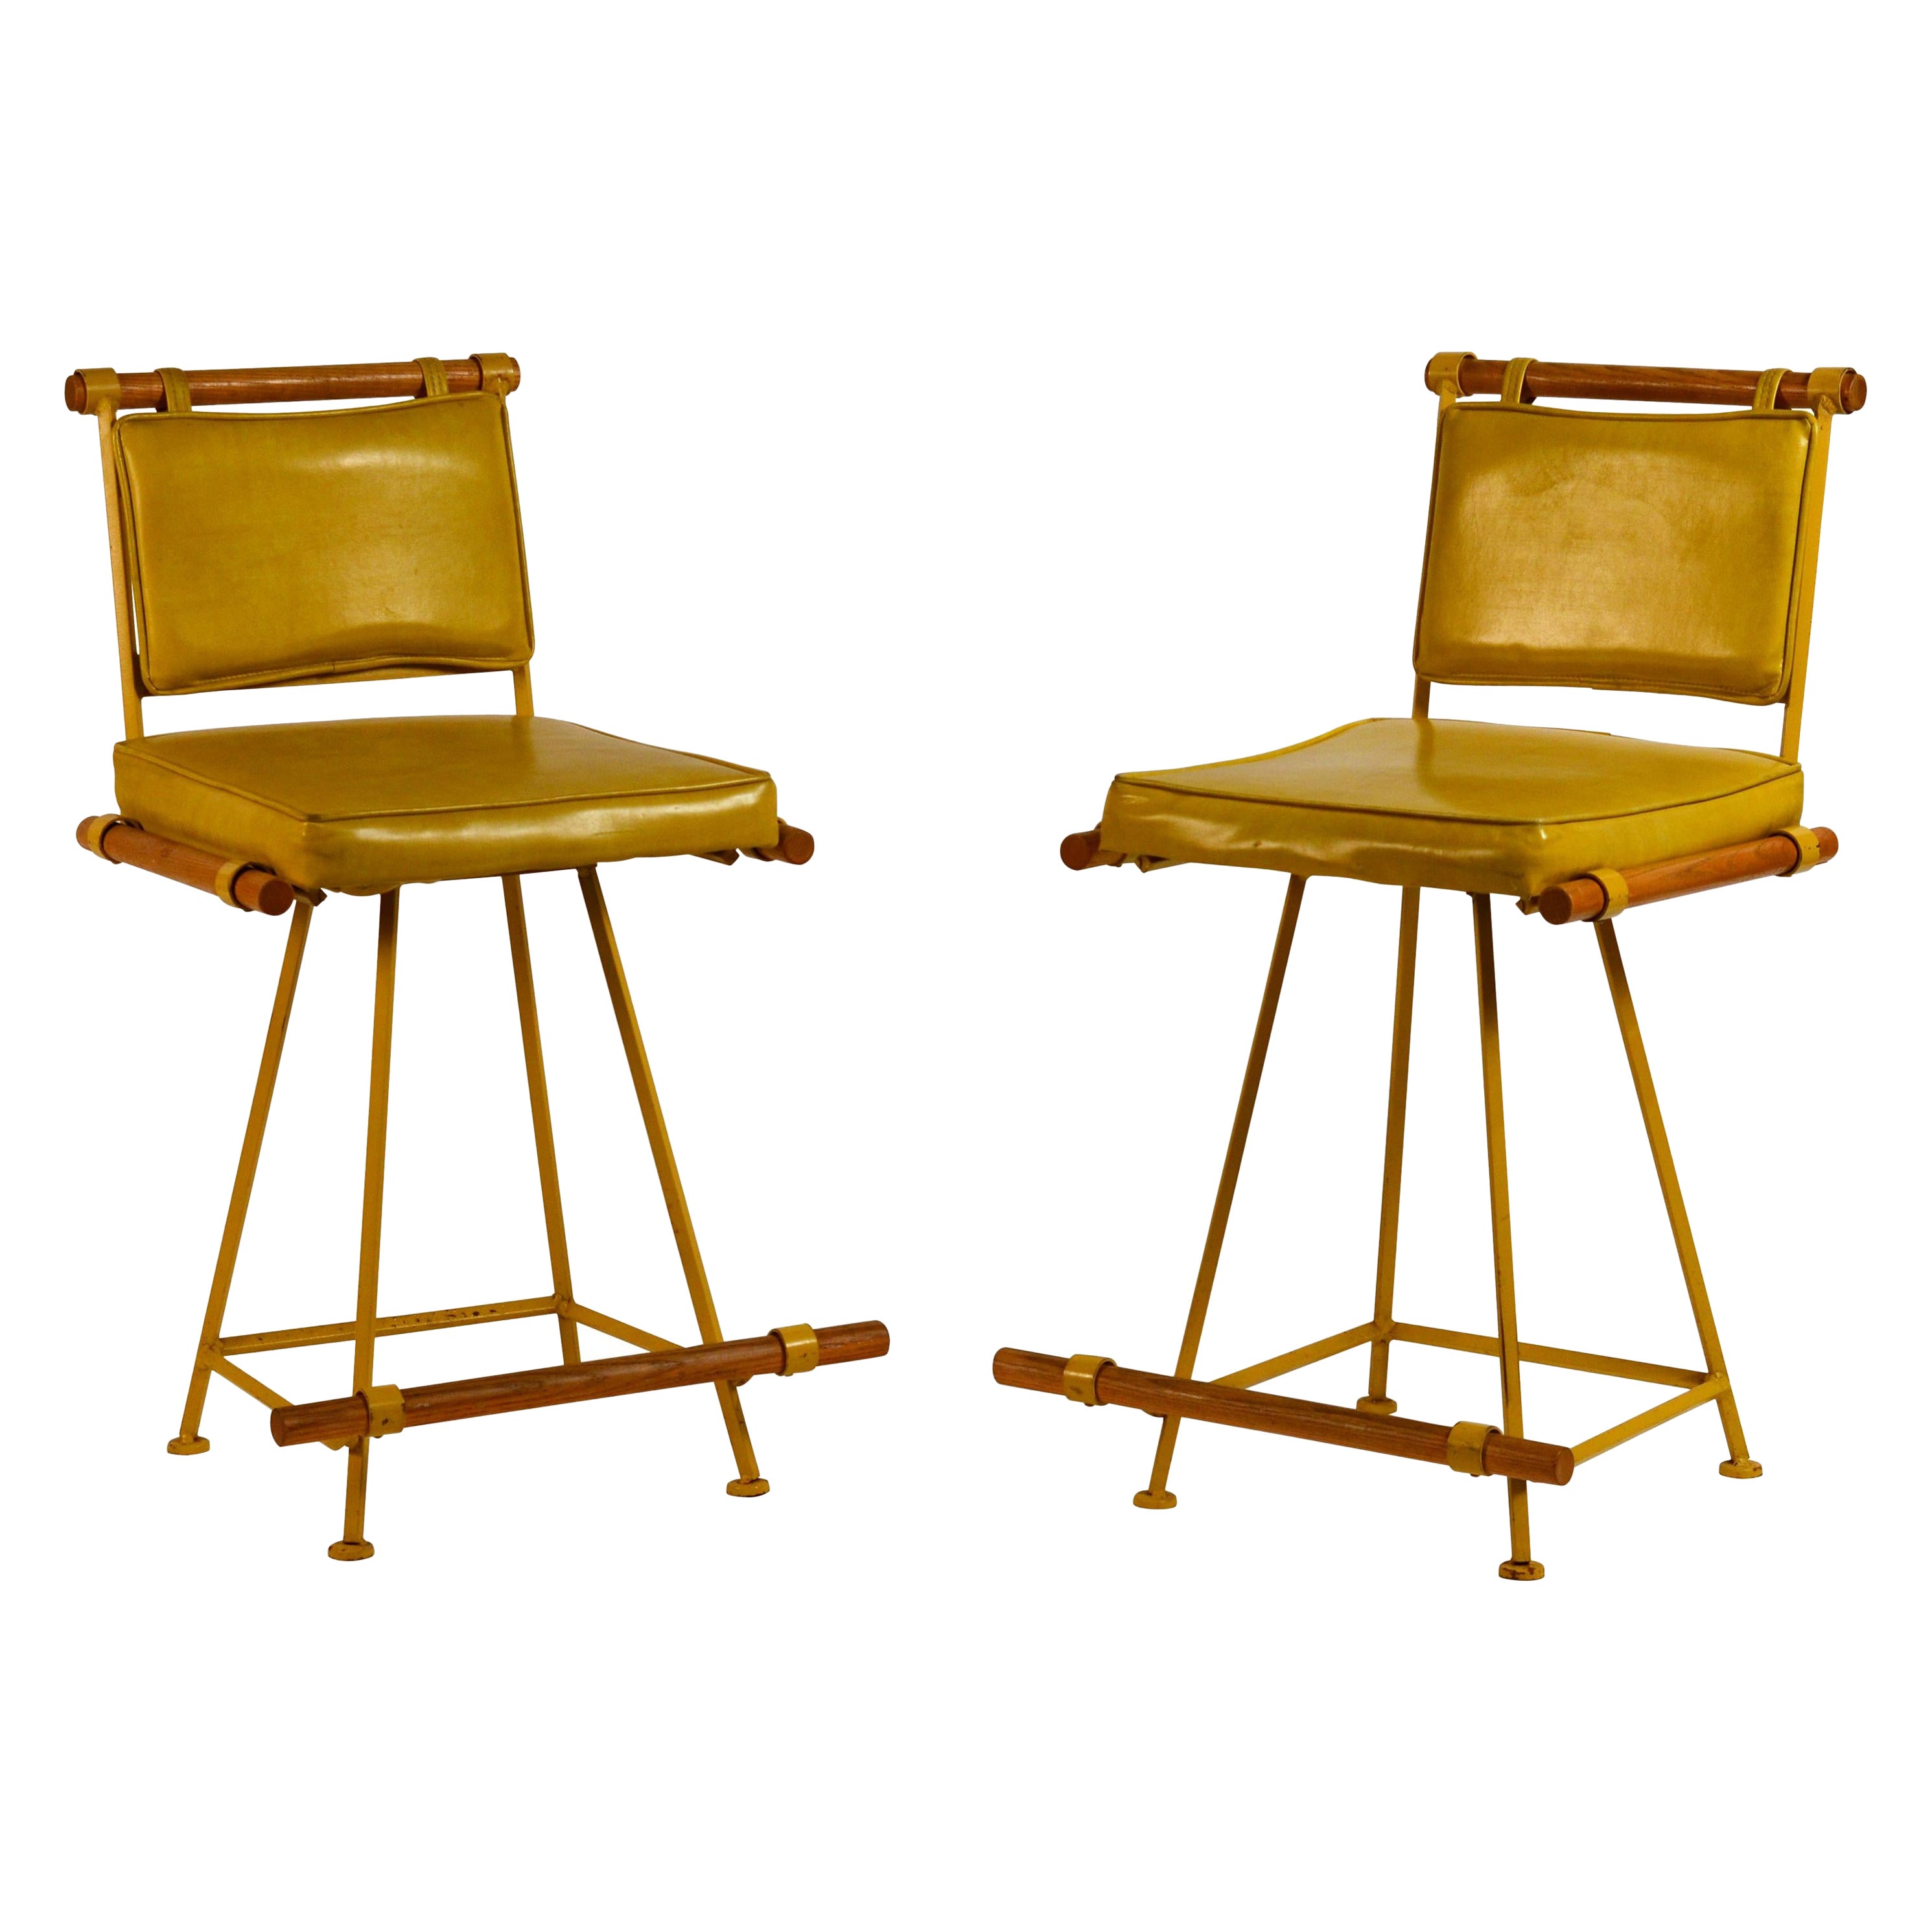 Pair of Yellow 'Los Feliz' Swiveling Counter Stools by Design Frères